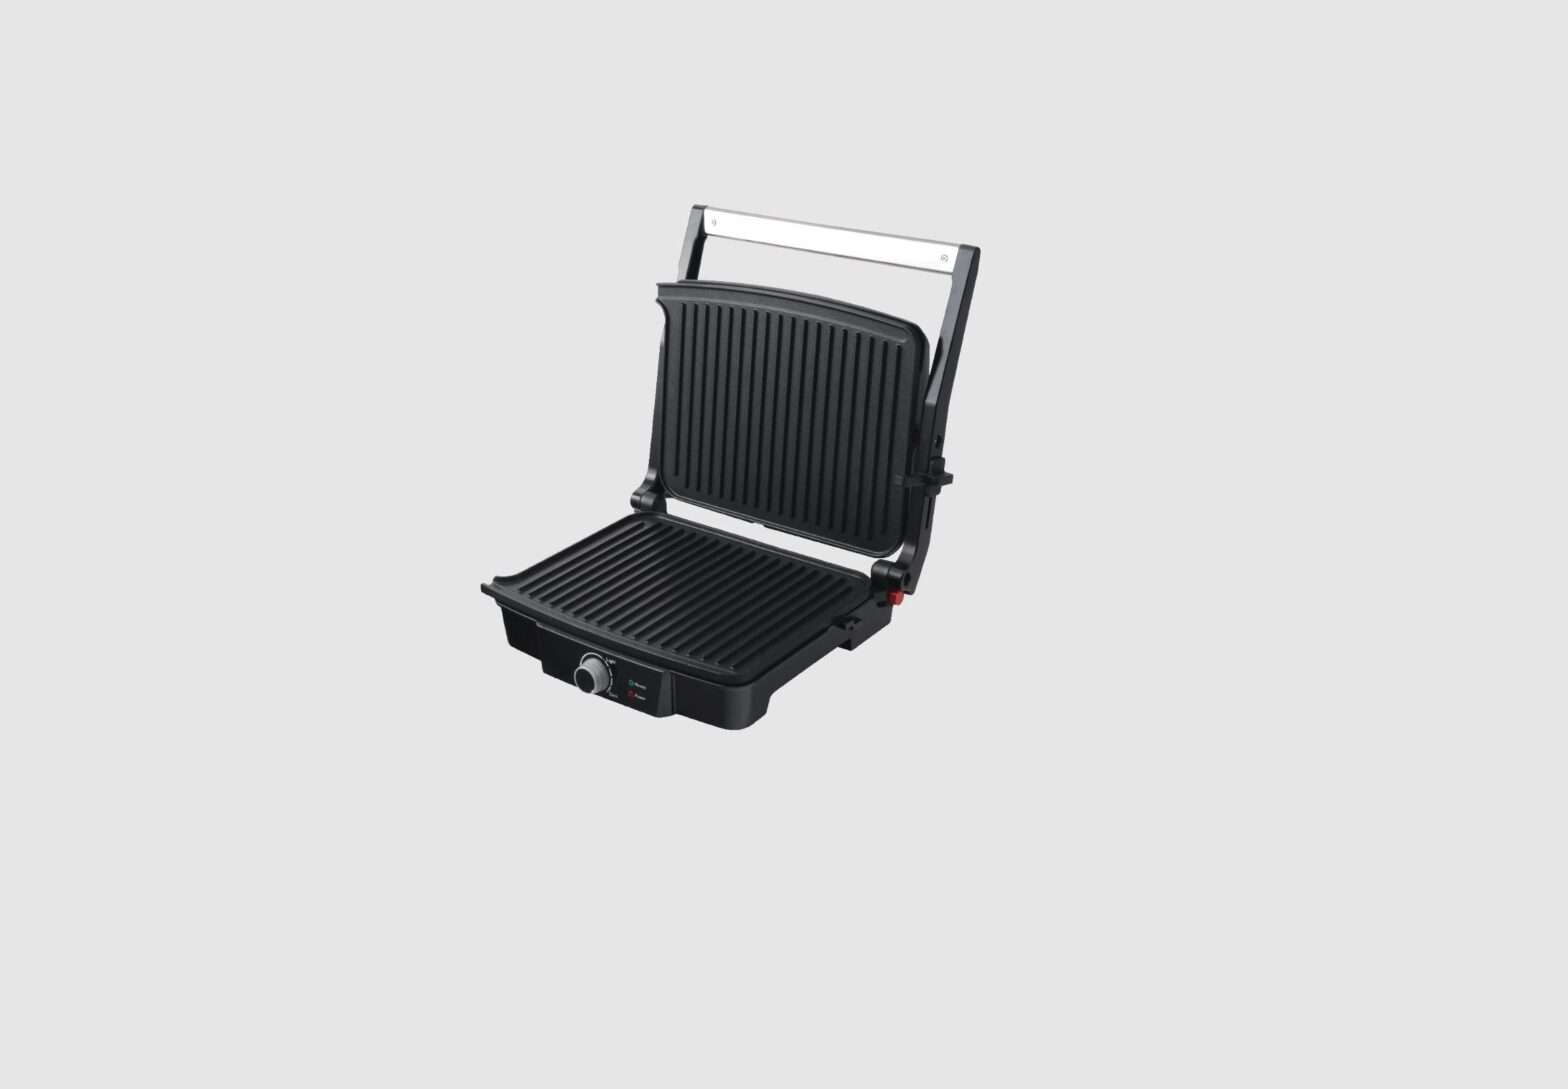 VOX Contact grill EG 161 Operating Instructions